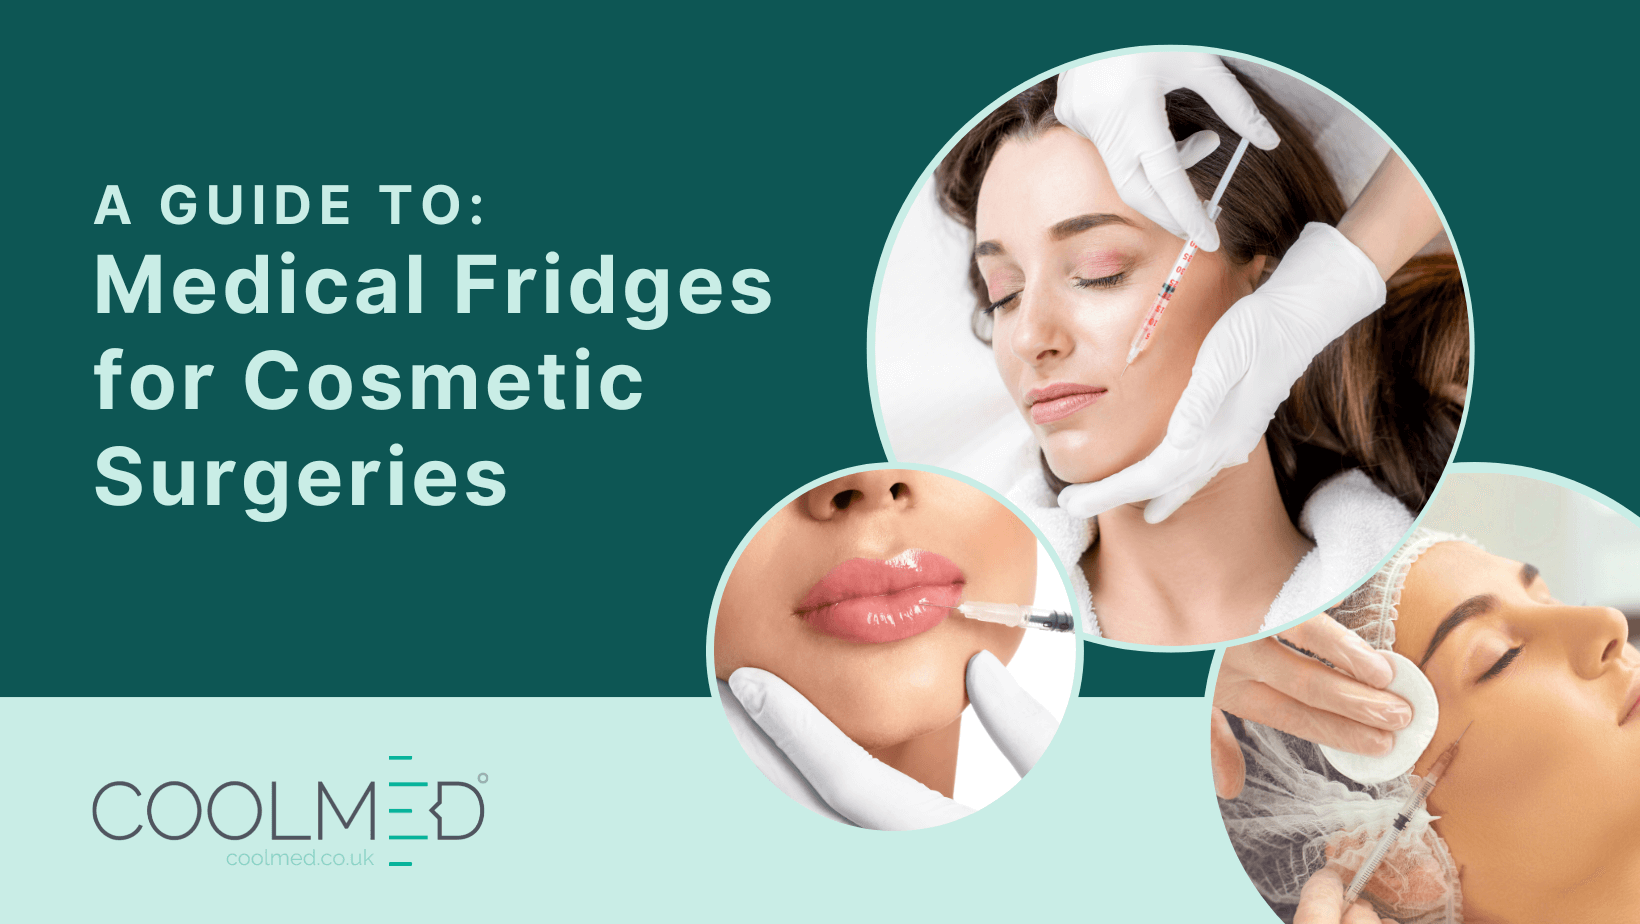 A guide to medical fridges for cosmetic surgeries graphic by CoolMed